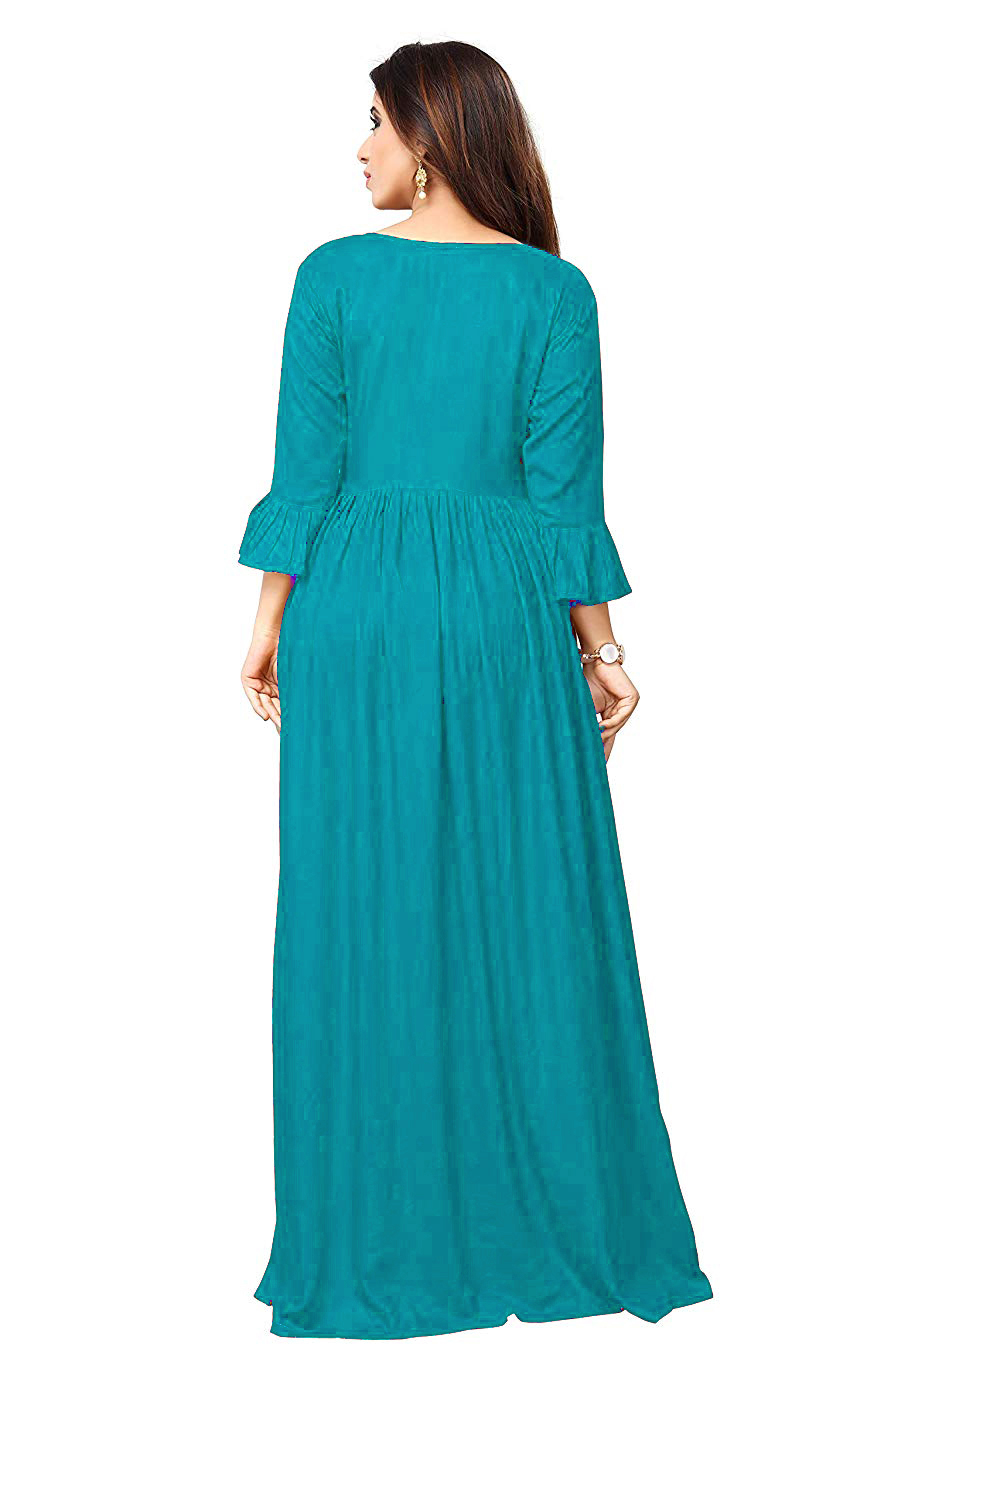 Buy FrionKandy Women's Turquoise Rayon 3/4th Sleeves Plain A Line Maxi ...